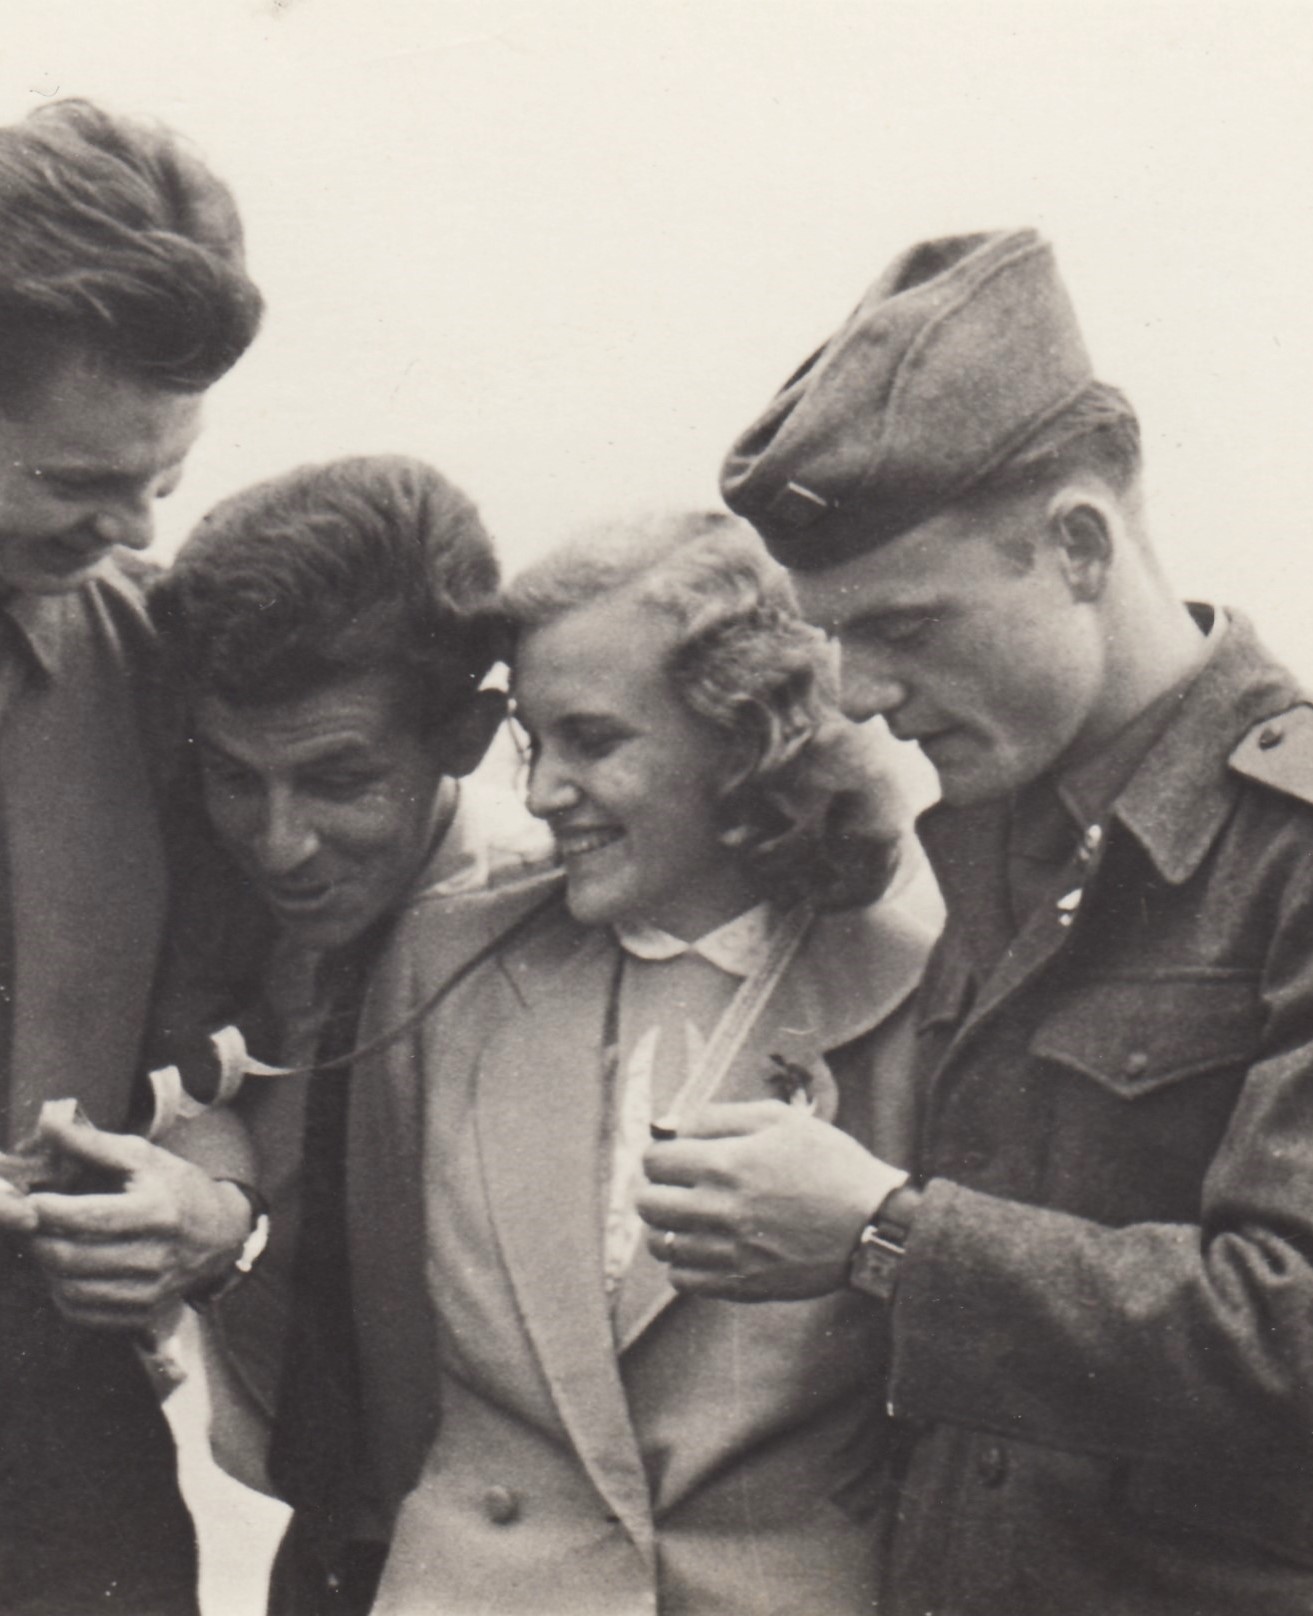 Naděje Dlouhá in 1954 in a wedding photo with her husband (far right) and friends